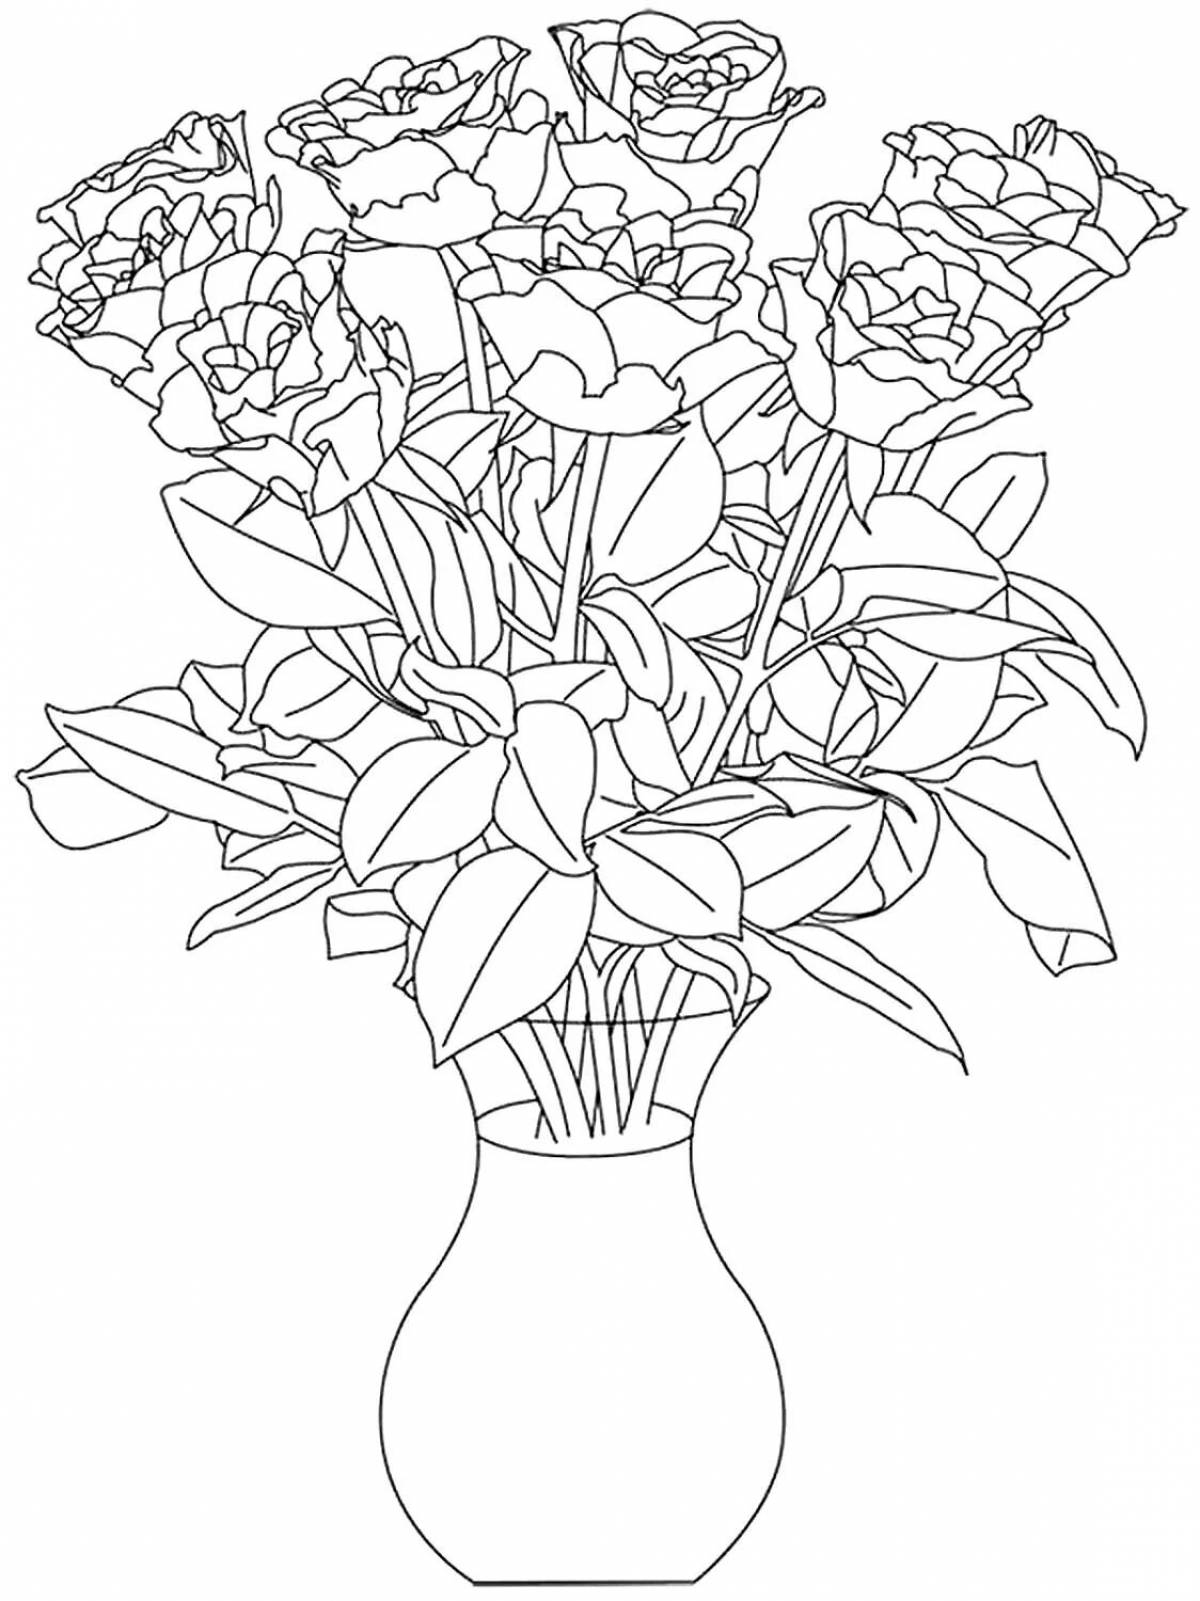 A bouquet of flowers in a vase #4